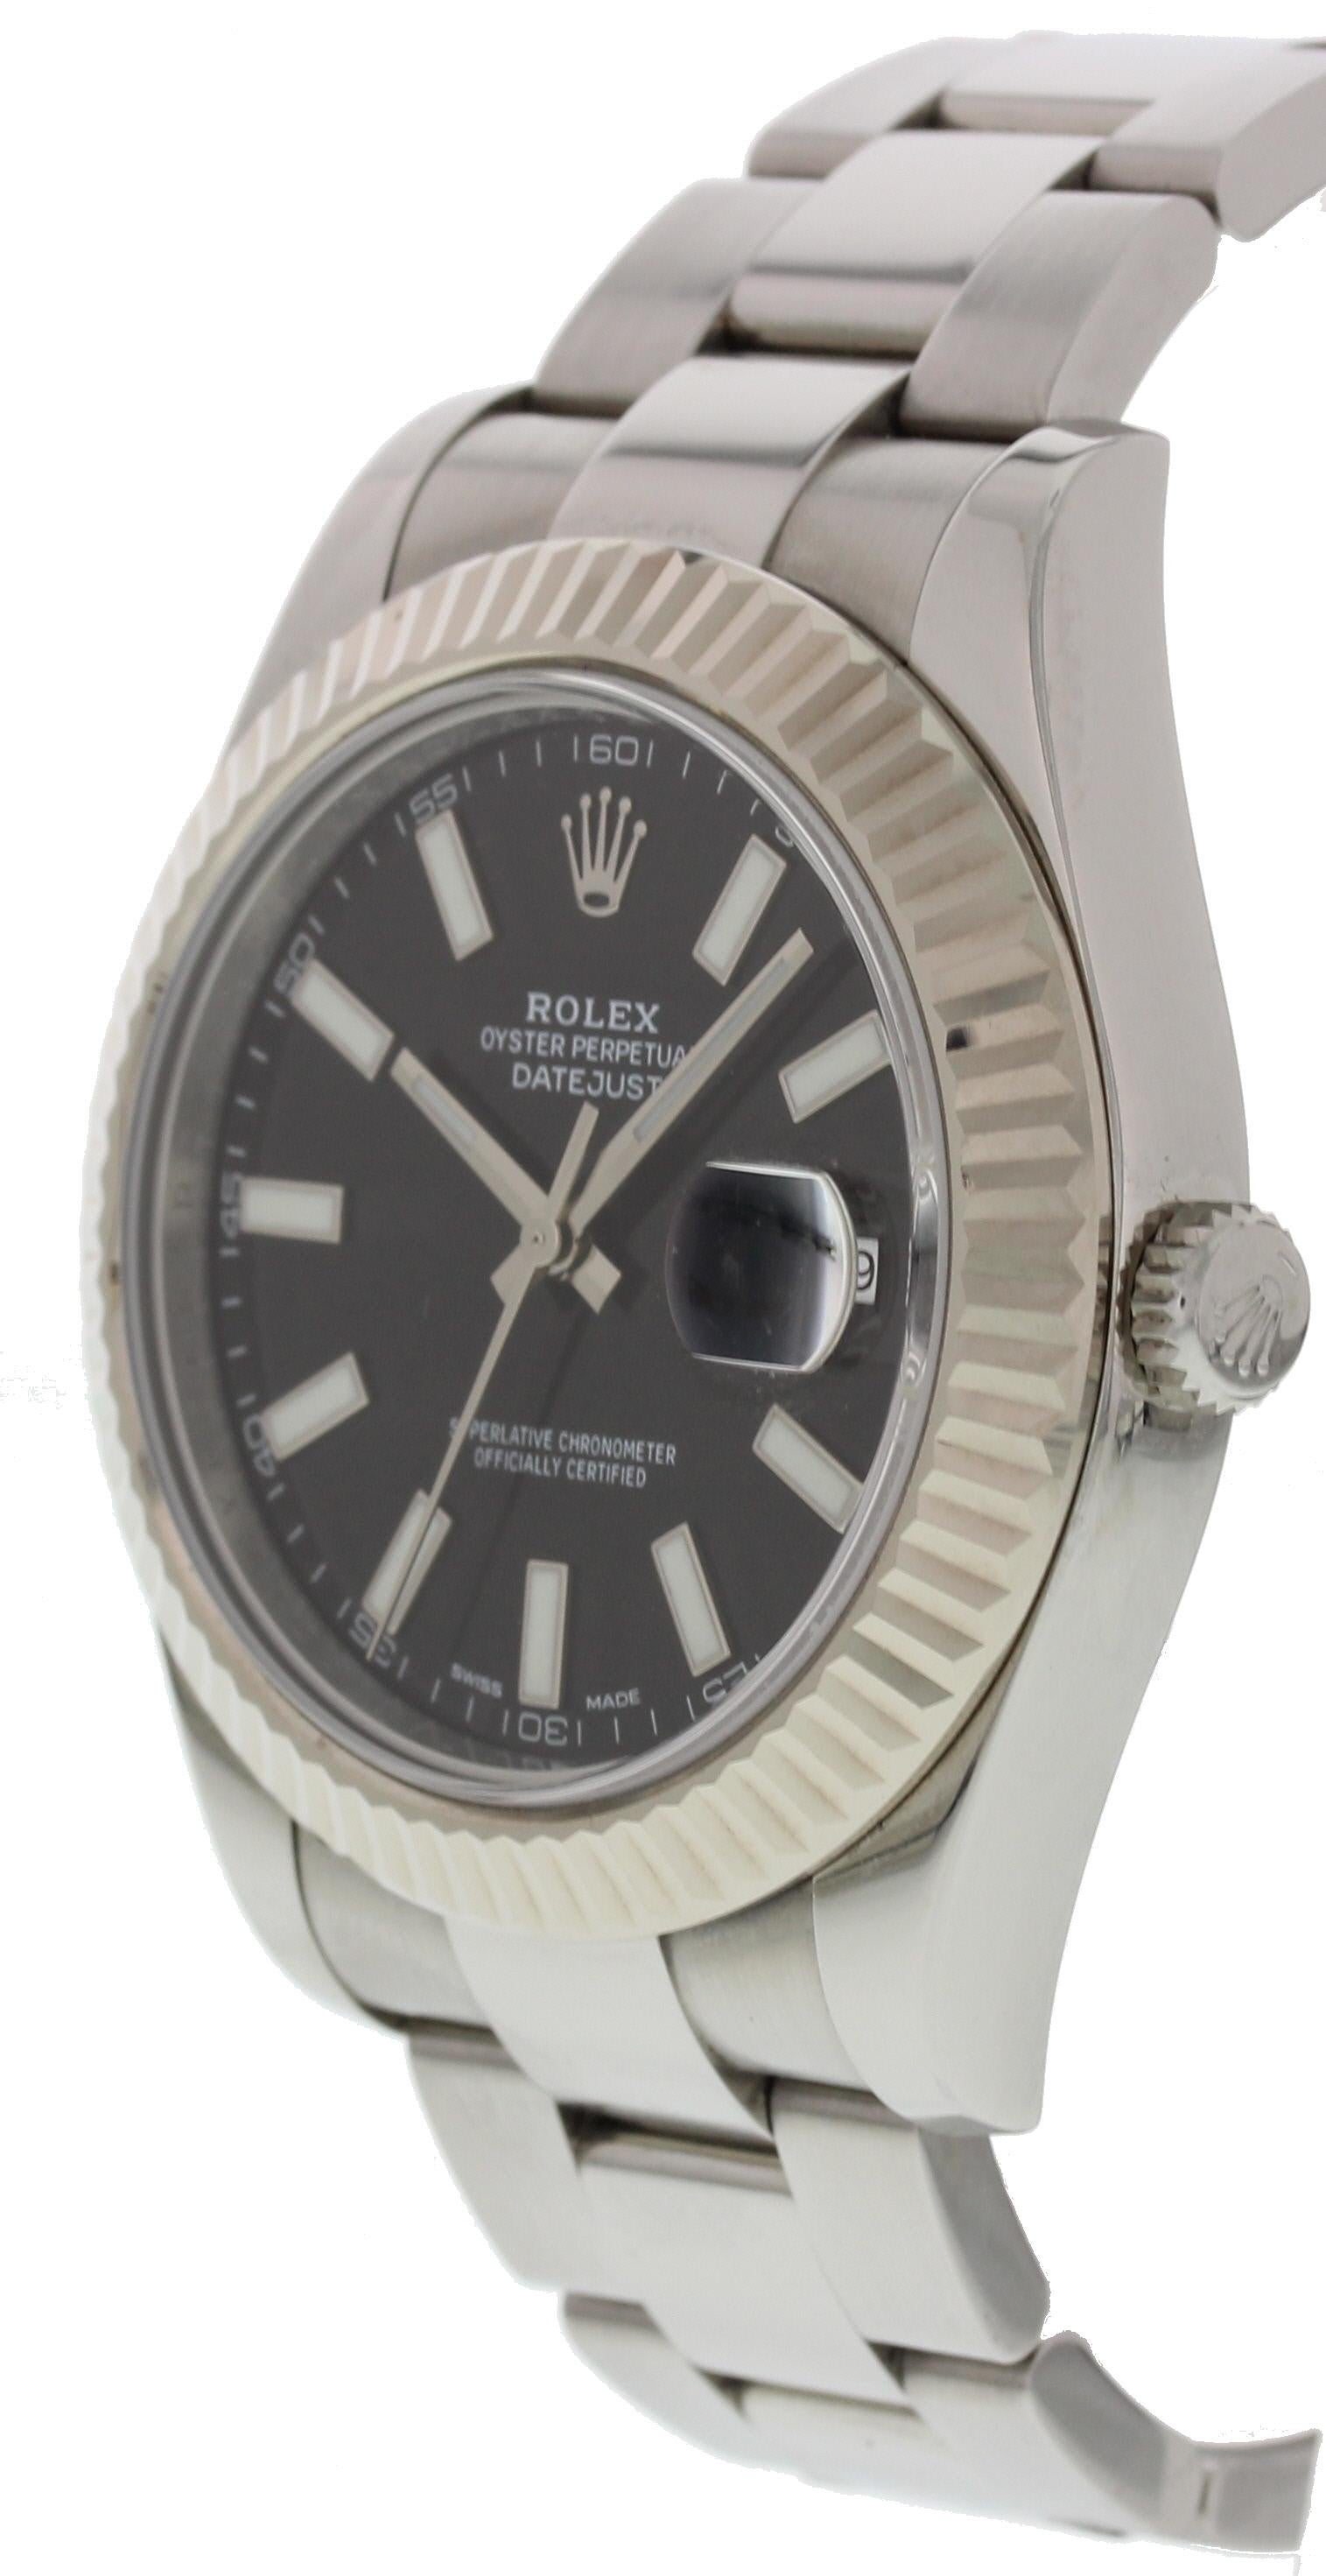 Rolex Oyster Perpetual Datejust II 116334. 41 mm Stainless steel case with an 18K white gold fluted bezel. Black dial with luminous hour markers and silver luminous hands. Quickset date function. Stainless steel oyster band with a fold over clasp.